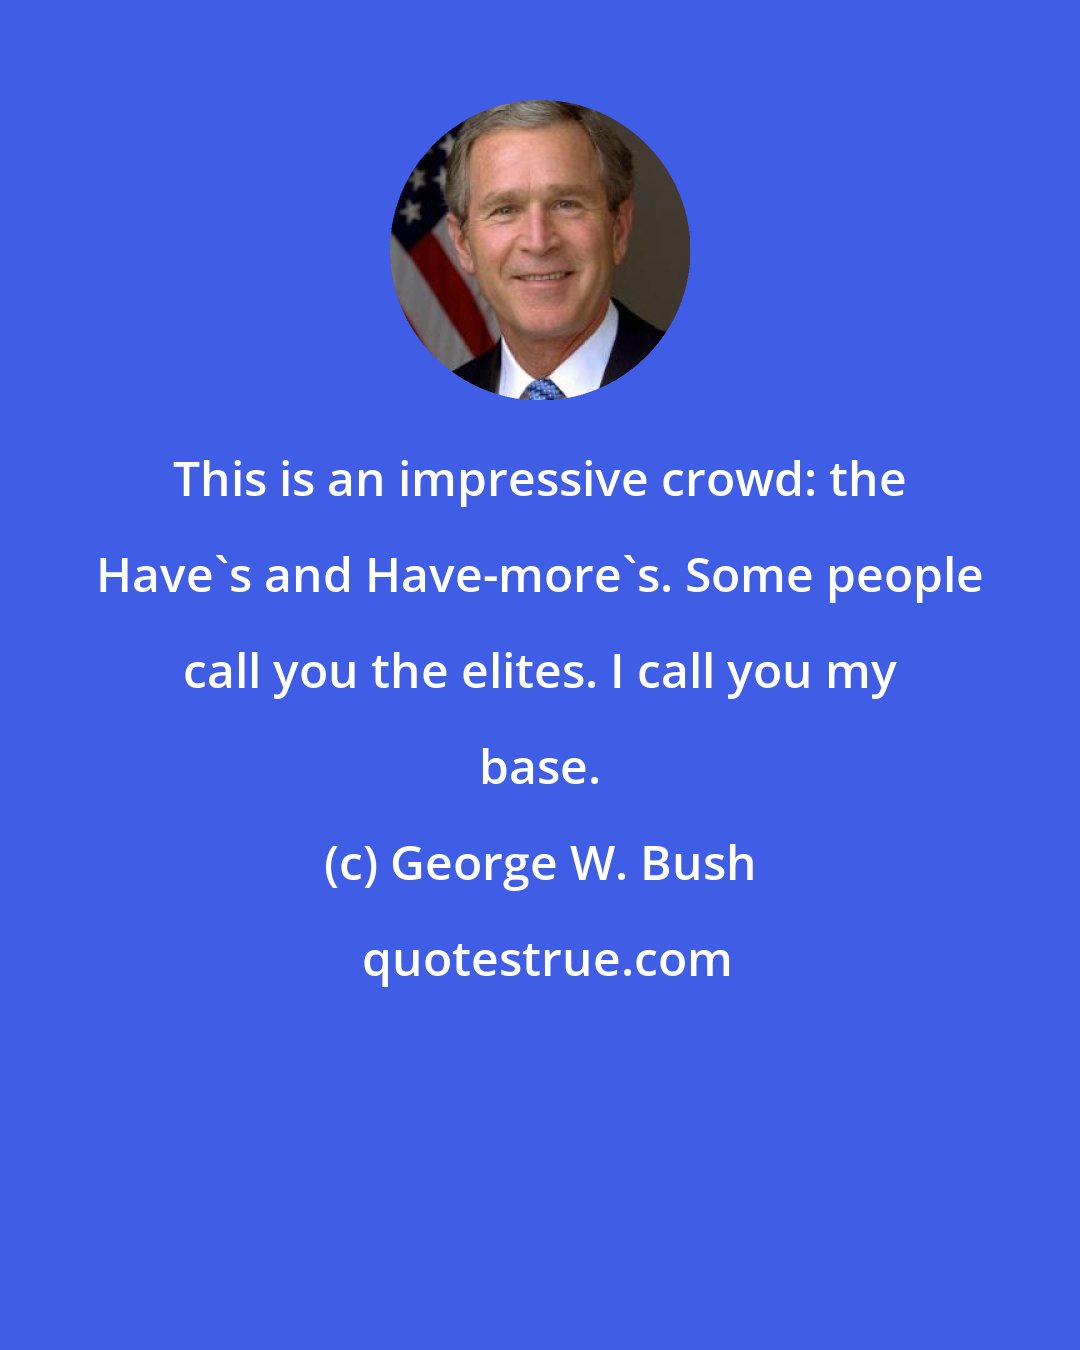 George W. Bush: This is an impressive crowd: the Have's and Have-more's. Some people call you the elites. I call you my base.